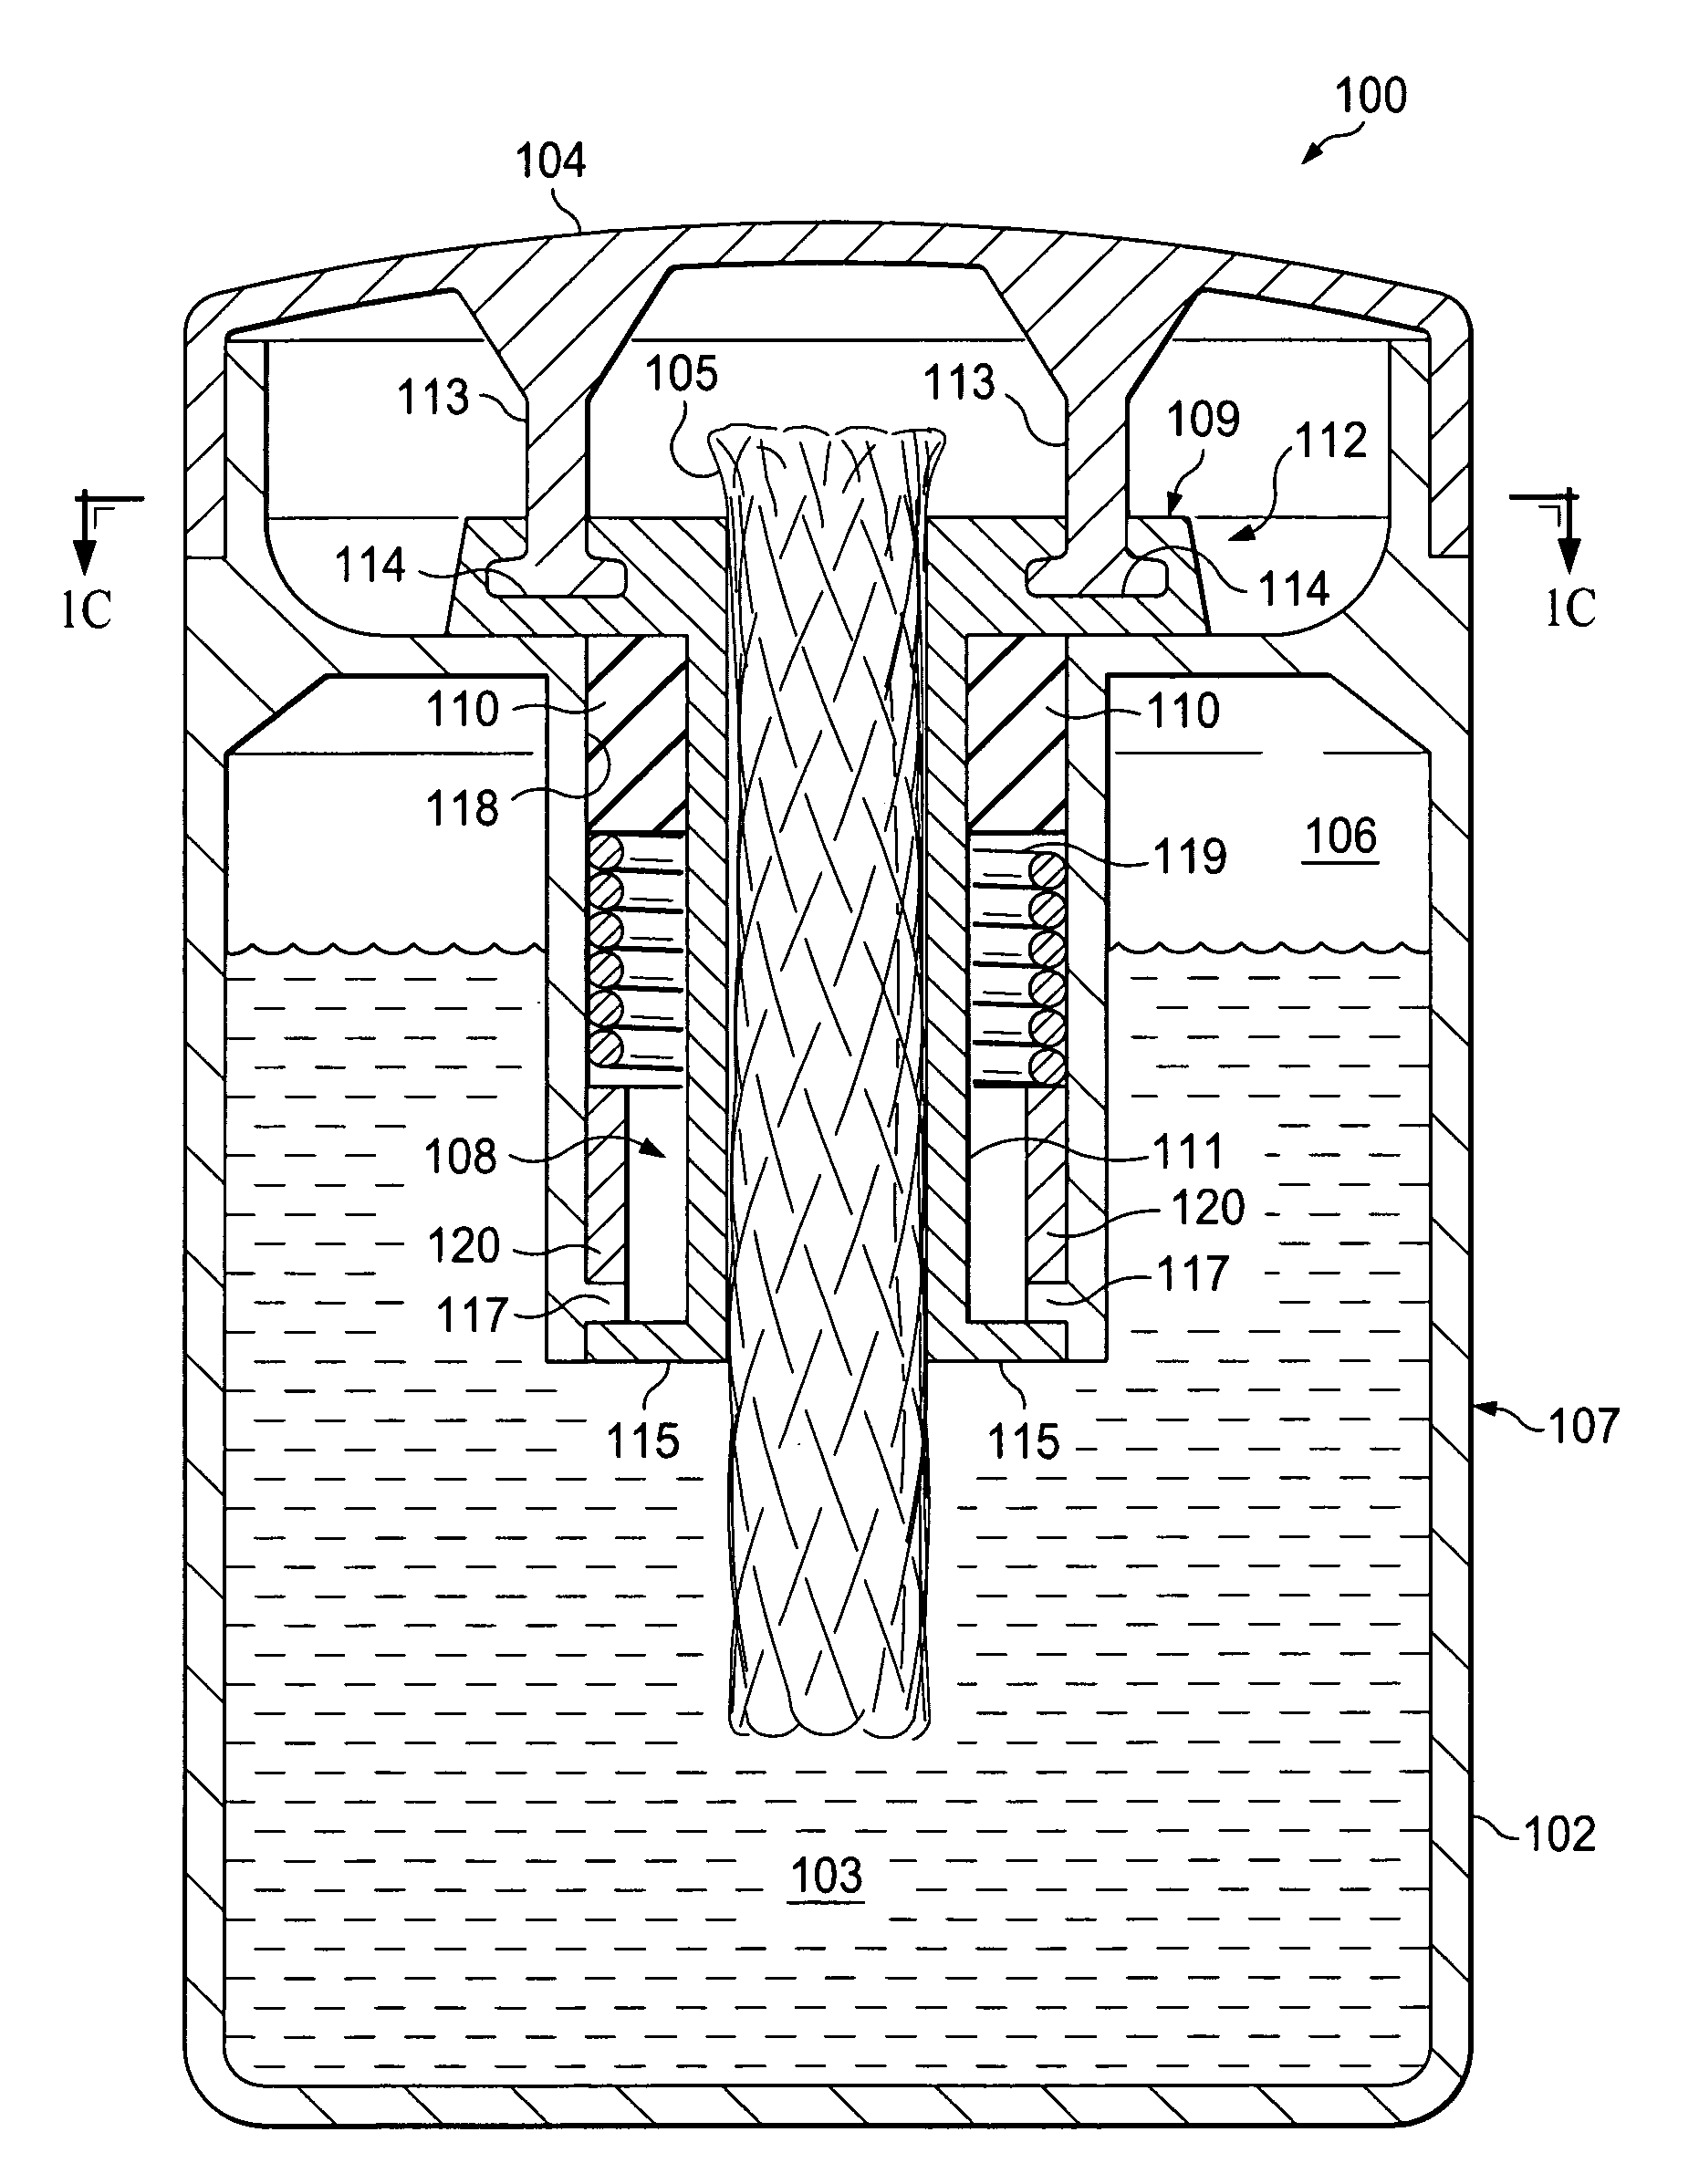 Torch with operating device